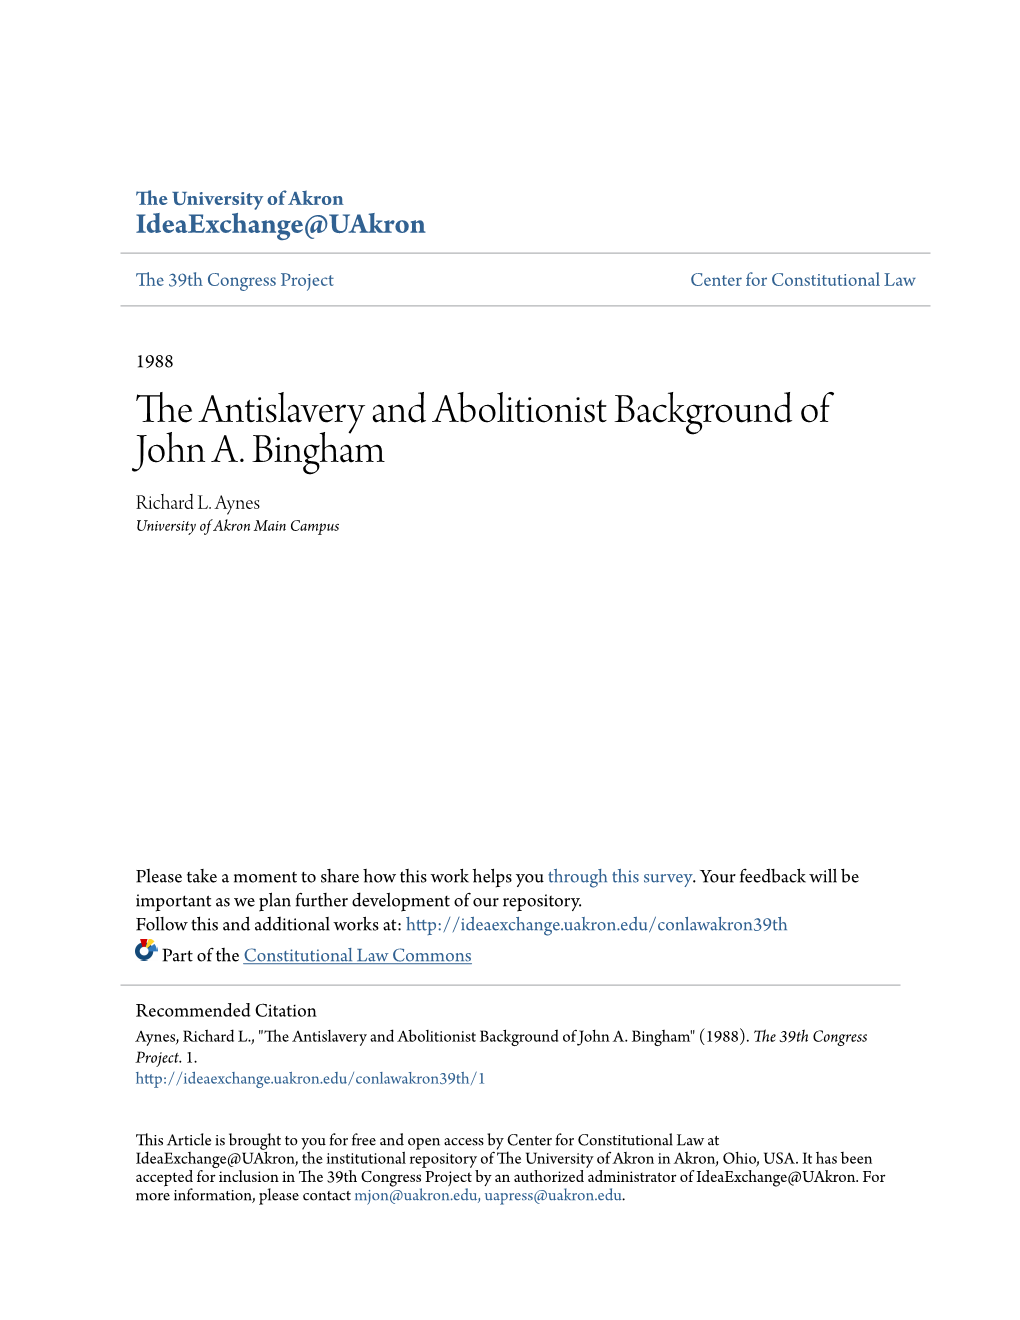 The Antislavery and Abolitionist Background of John A. Bingham Richard L